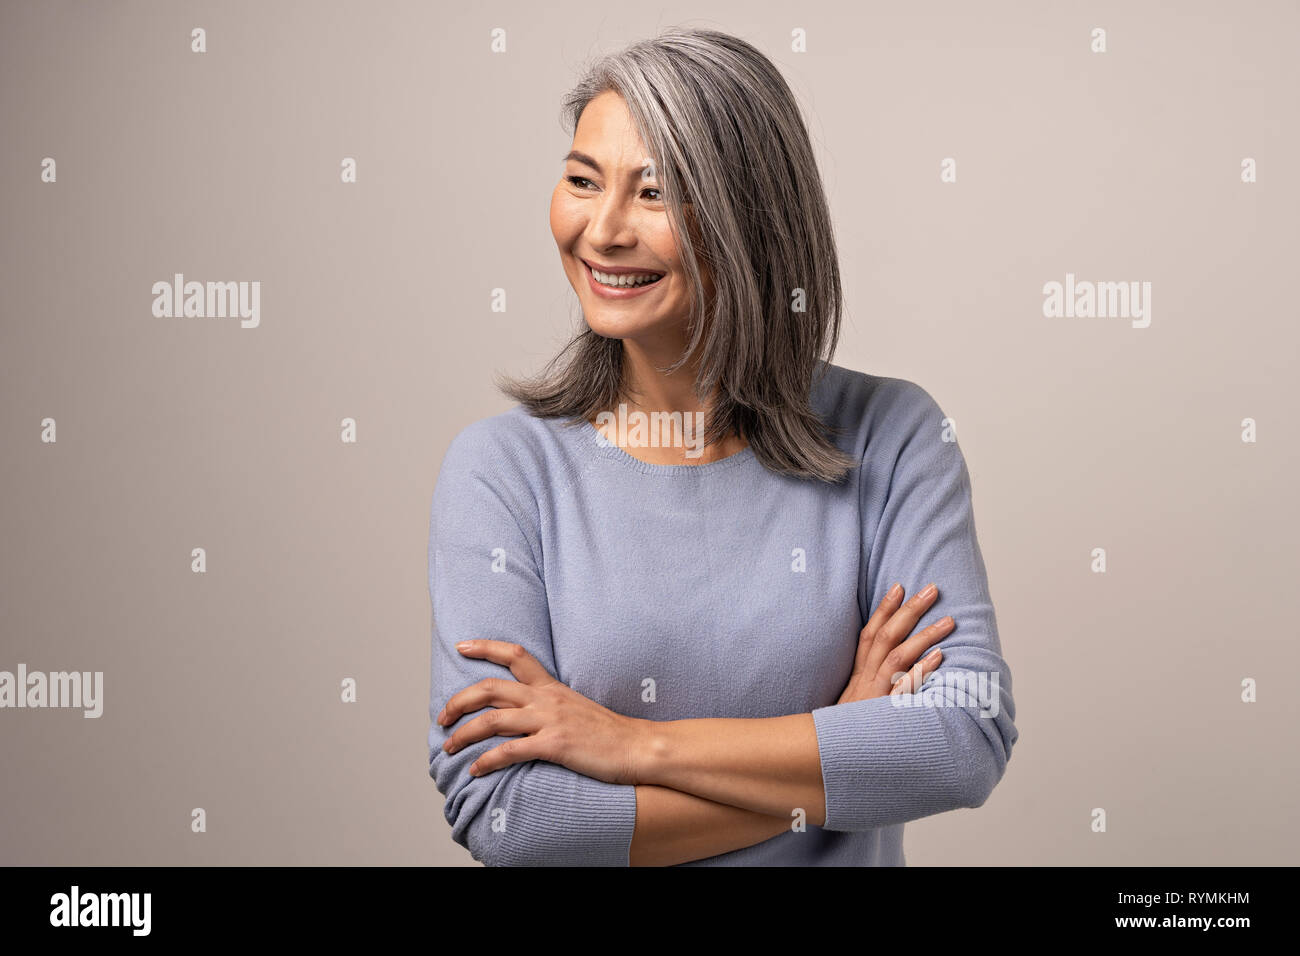 Smiling Asian senior woman with crossed arms Stock Photo